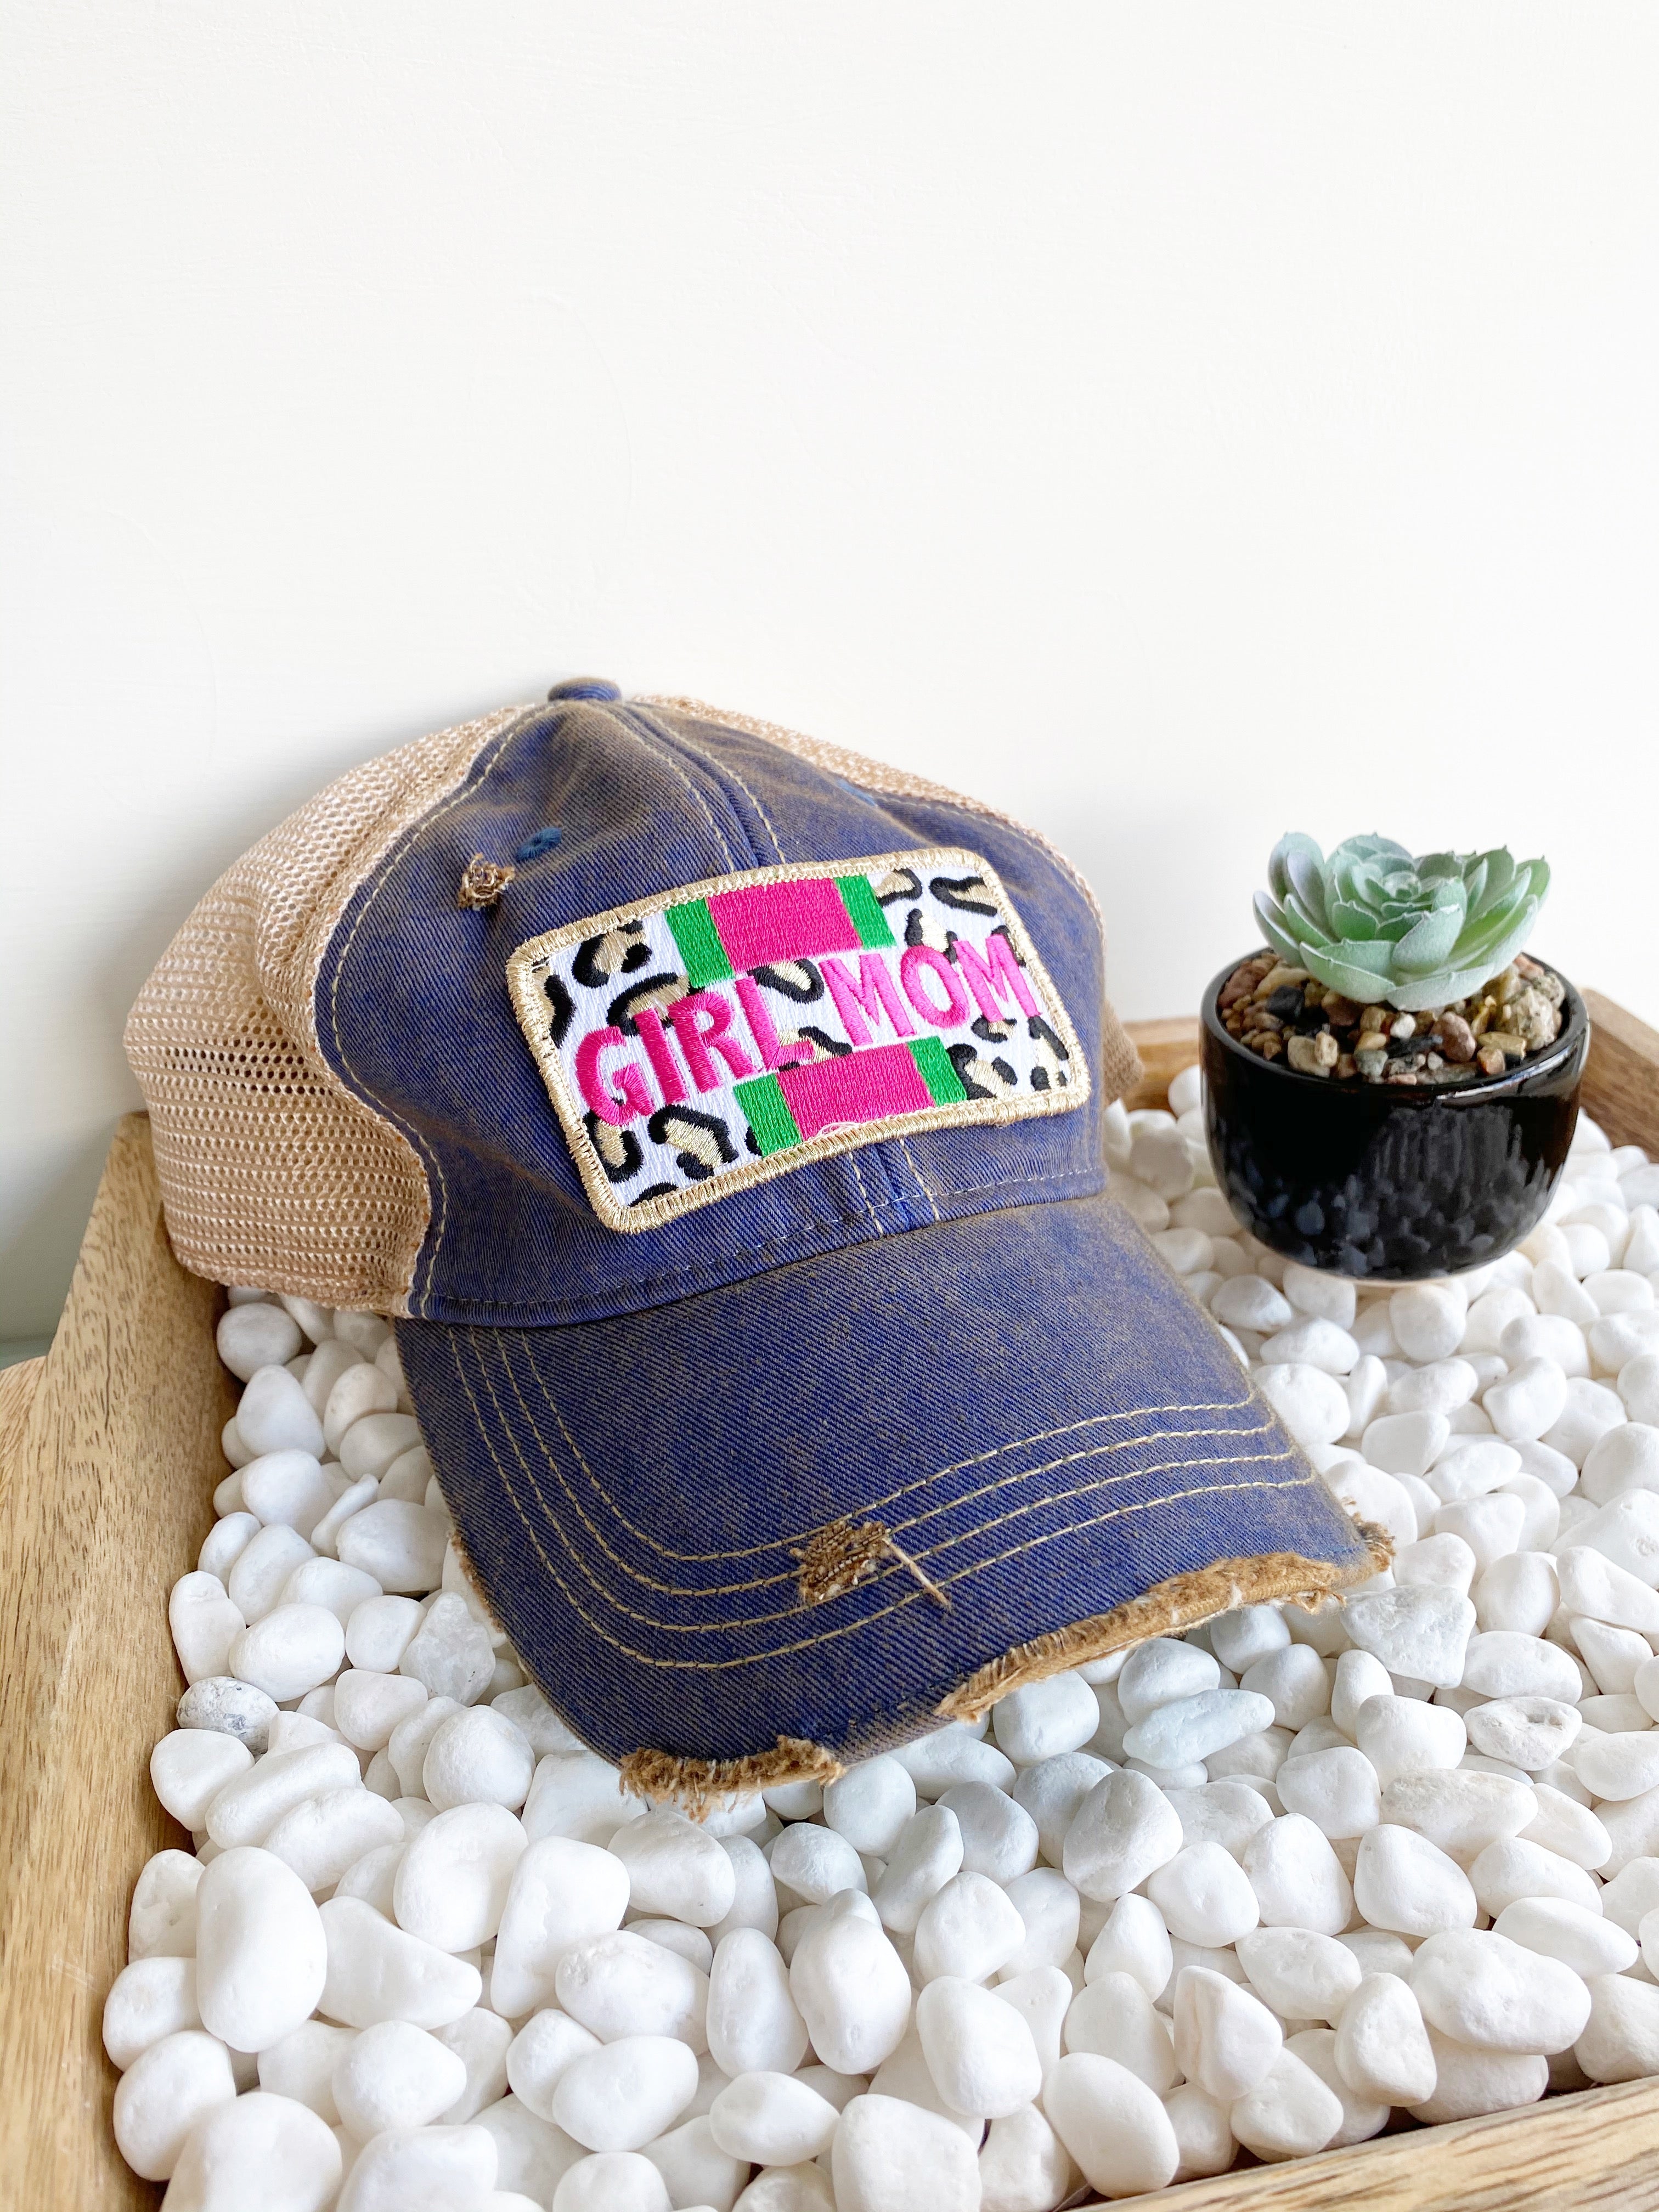 Distressed denim and mesh hat that reads GIRL MOM with leopard print, green, and pink embroidery